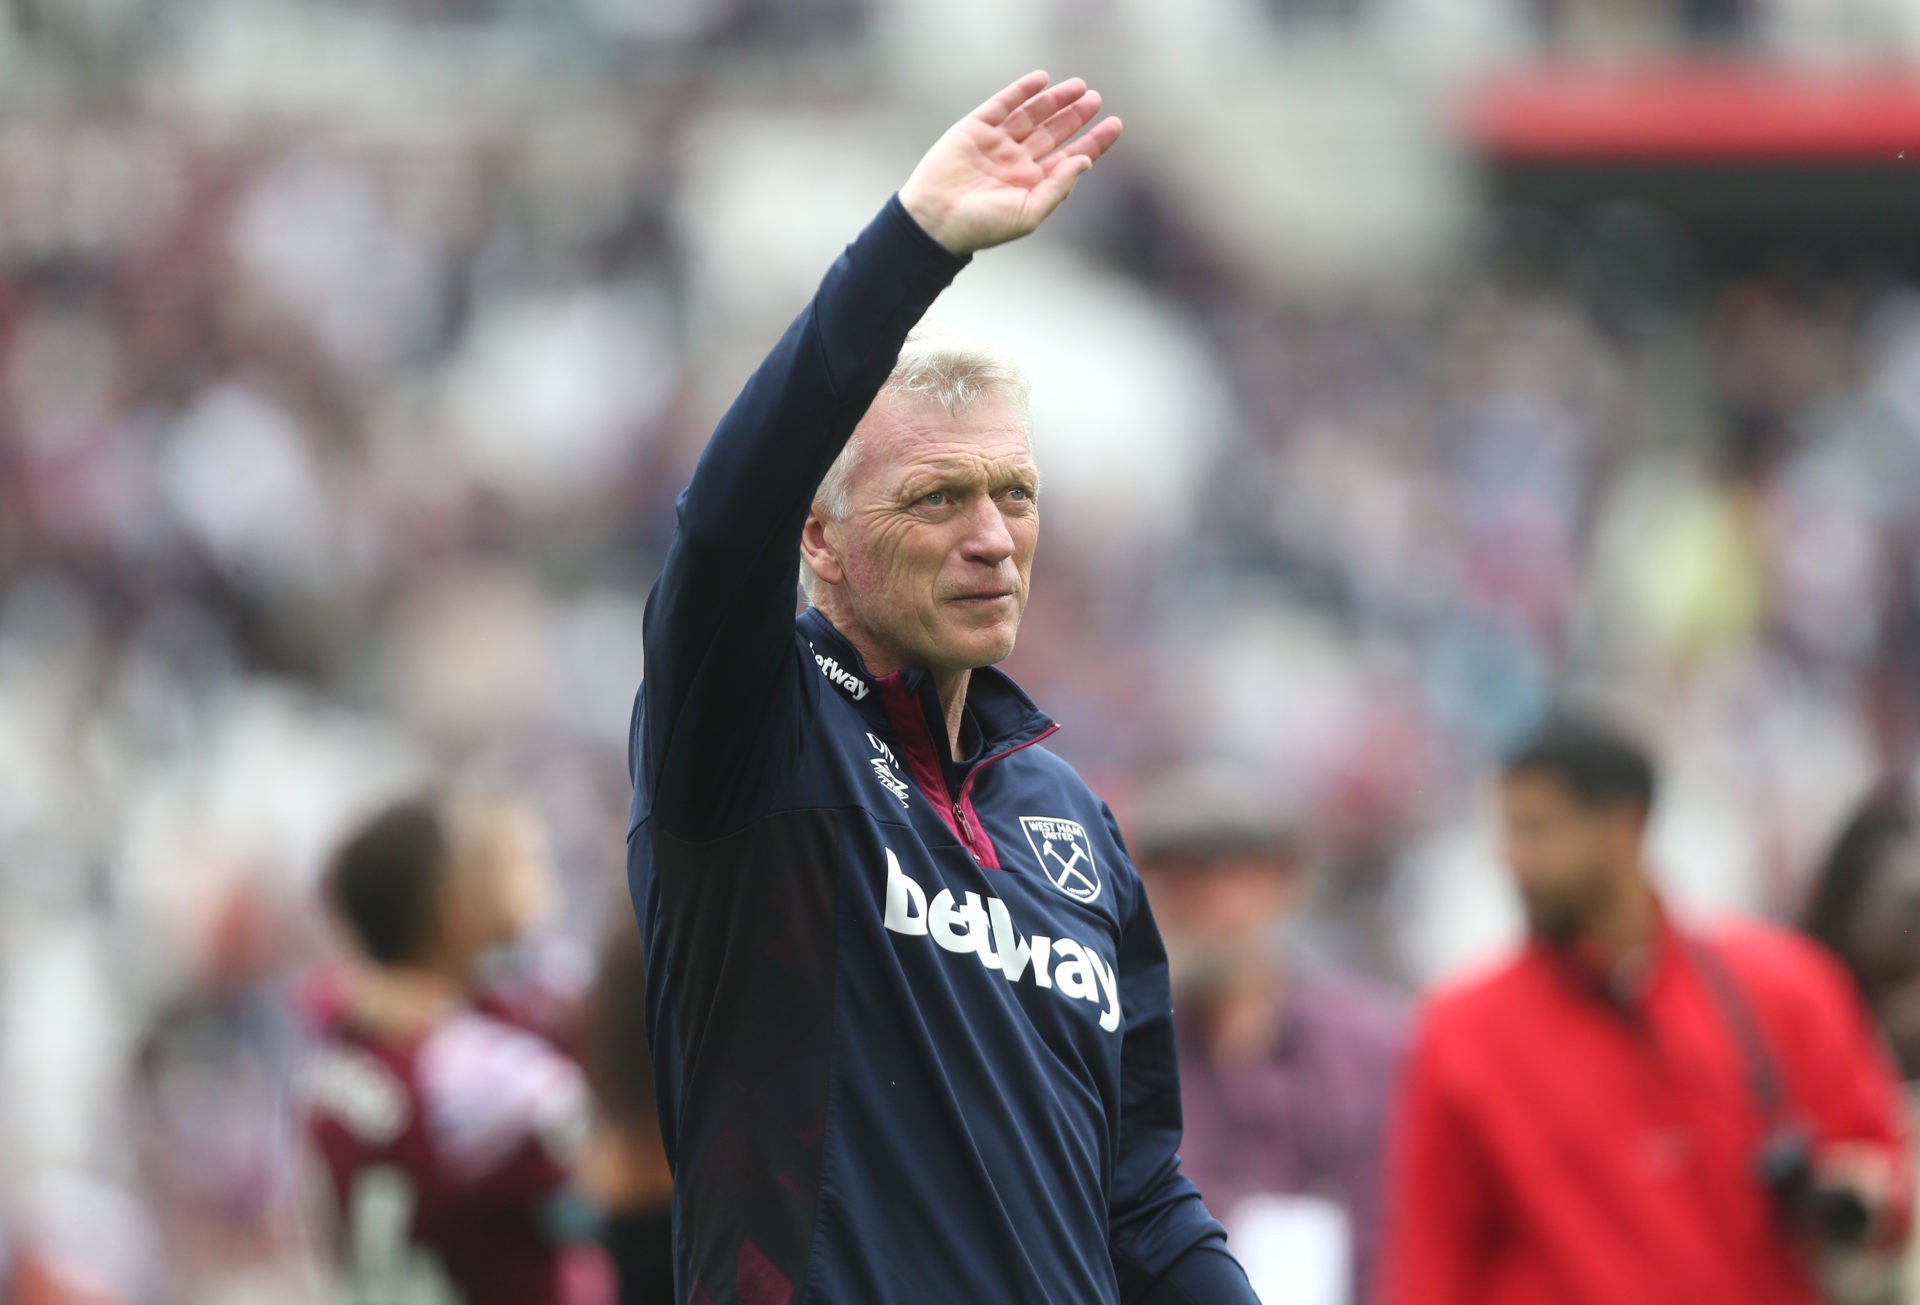 Fresh blow for West Ham as Moyes says 28-year-old has suffered a knee injury